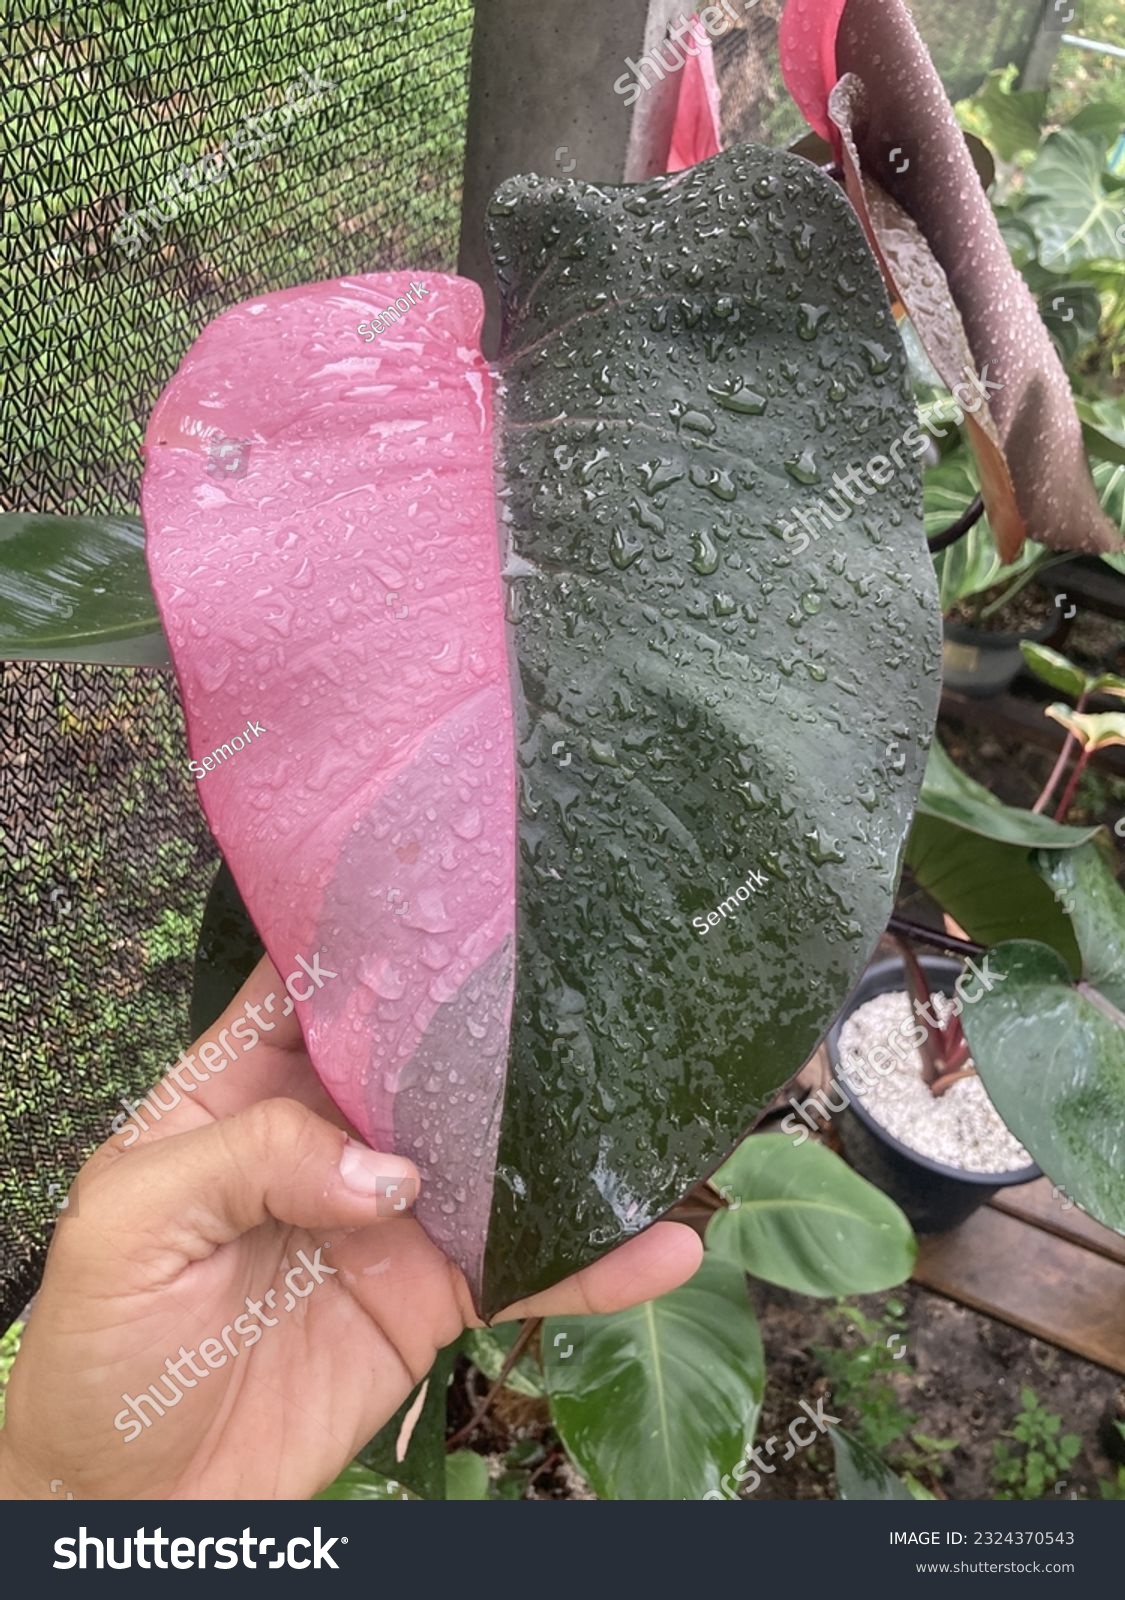 Philodendron pink princess variegated rare items half color #2324370543